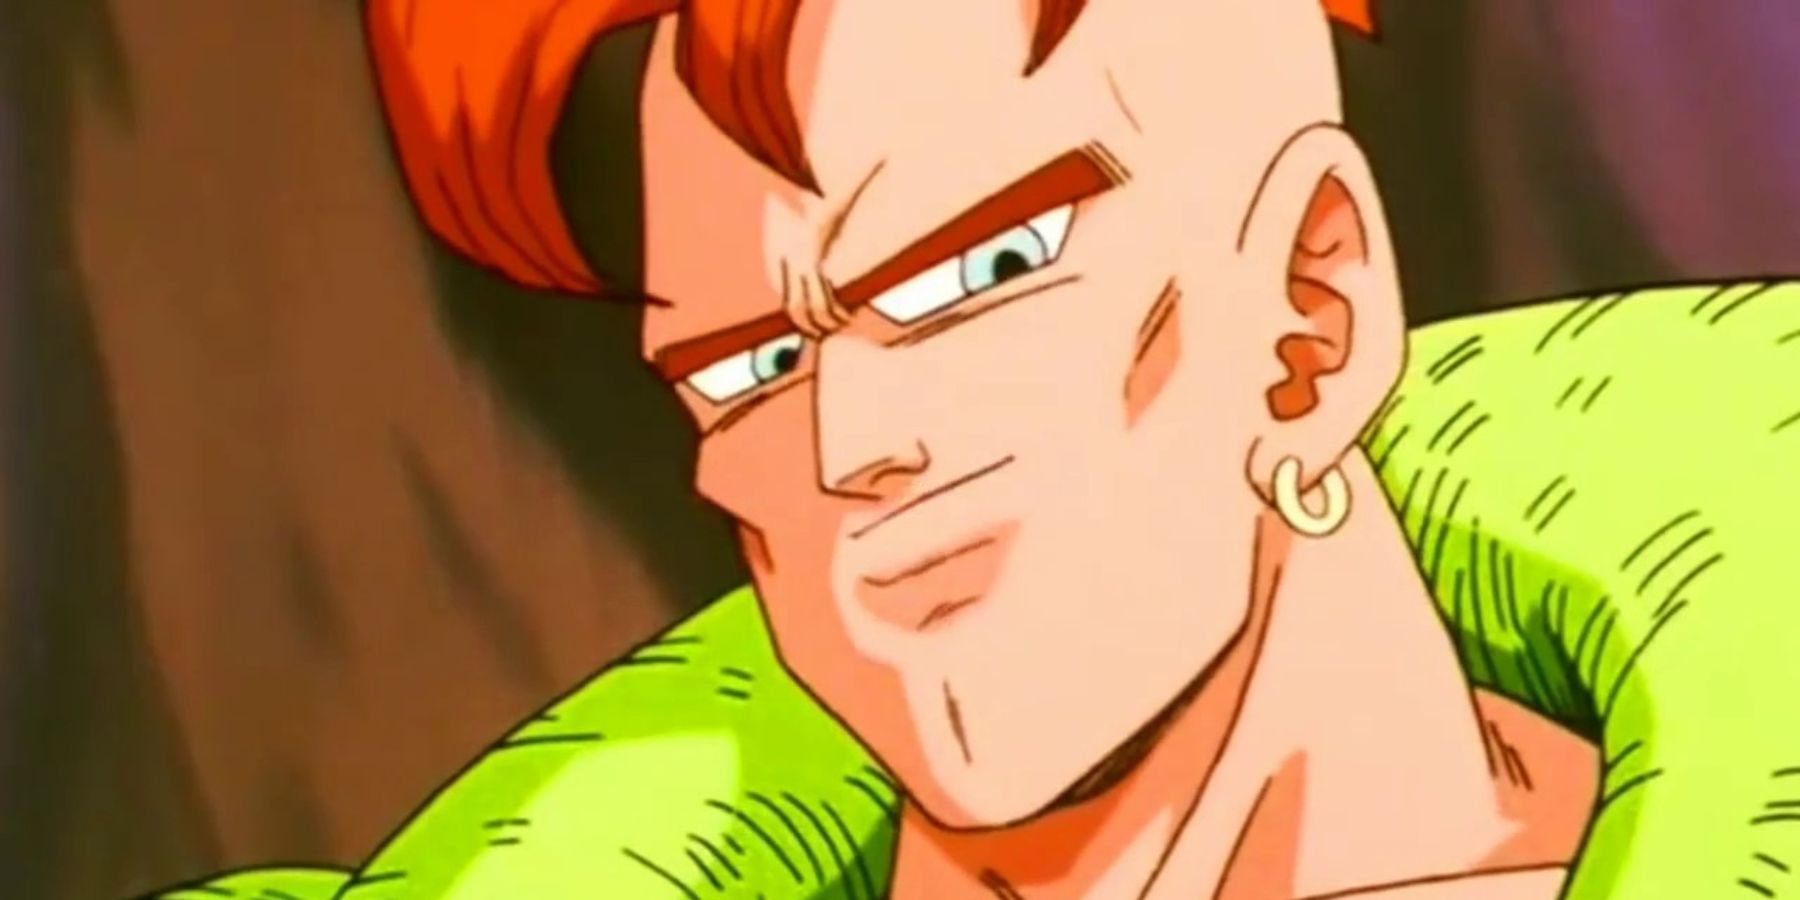 Android 16 (Dragon Ball Z)